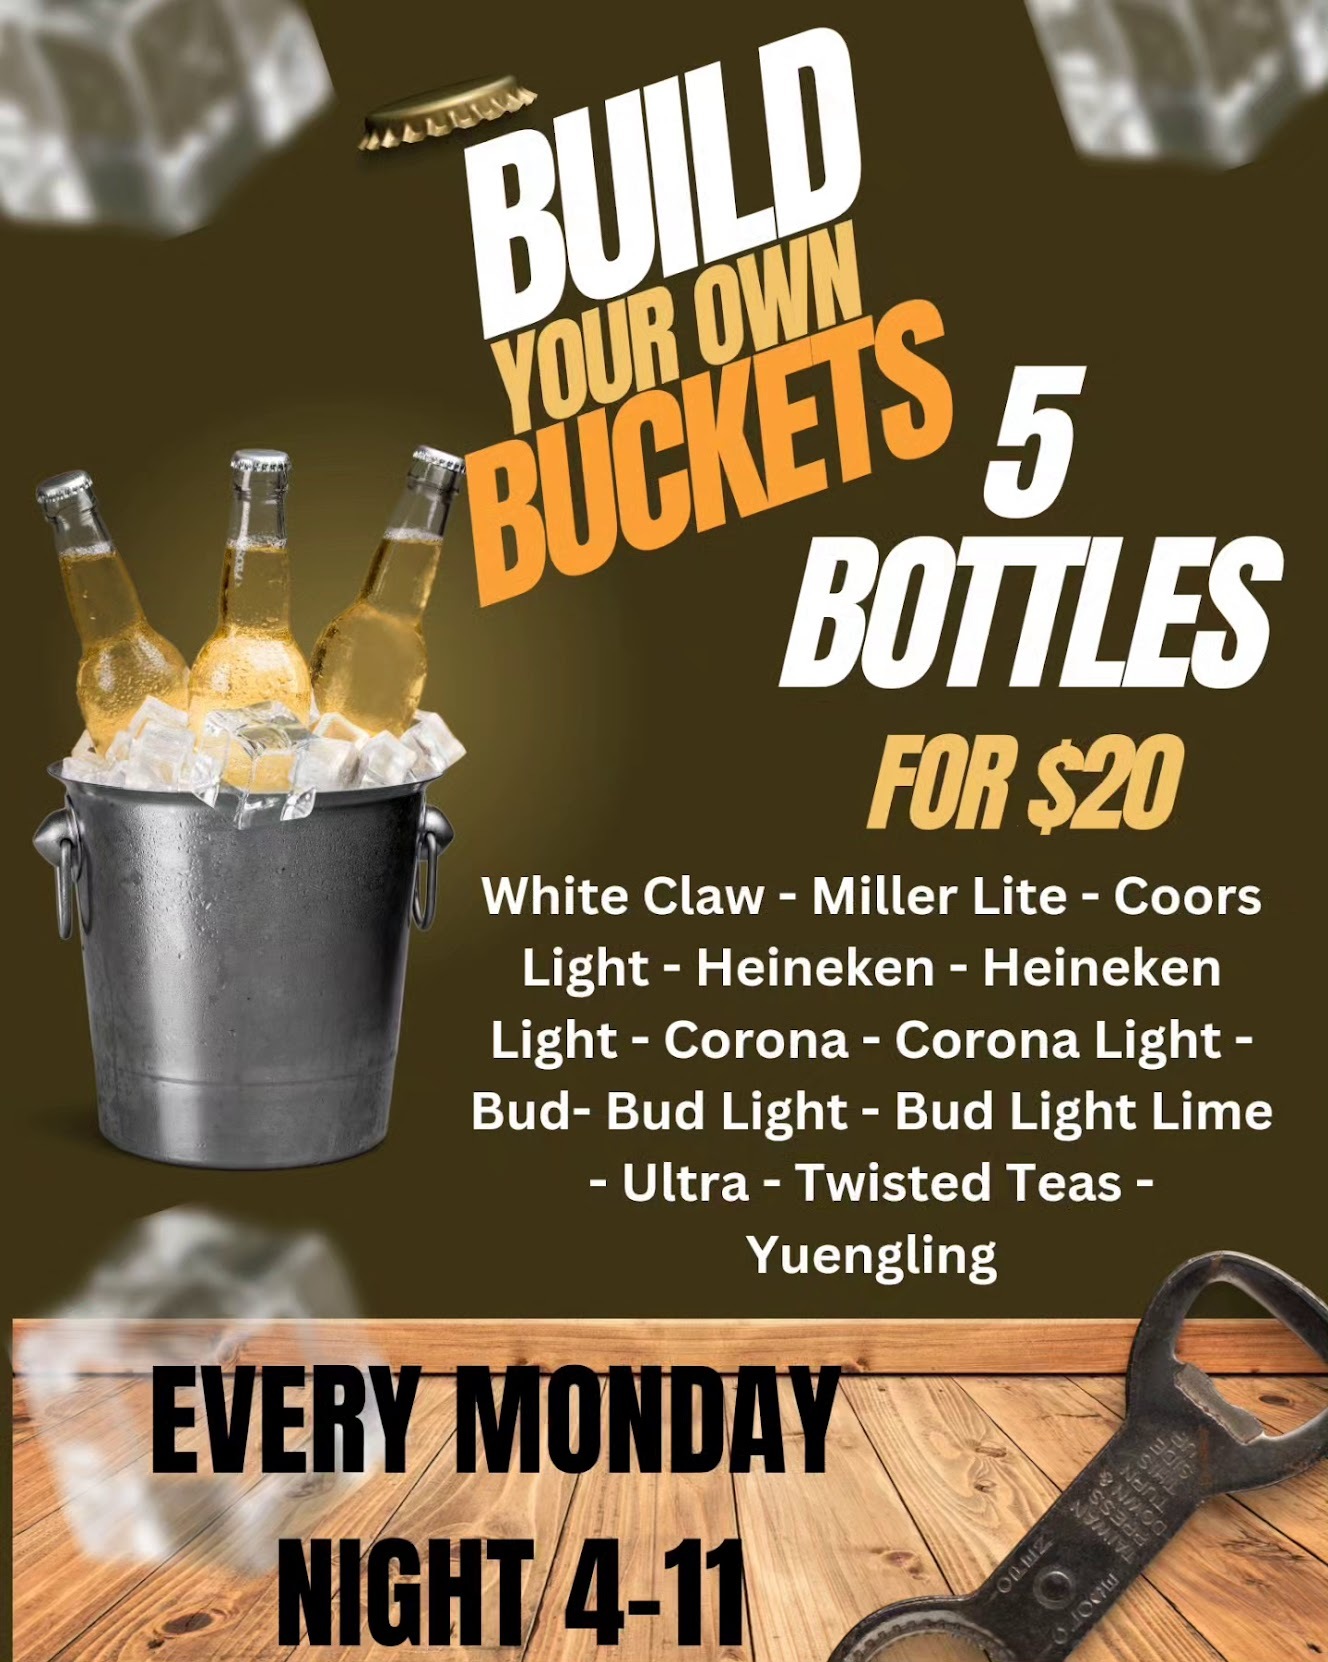 Build your own buckets.